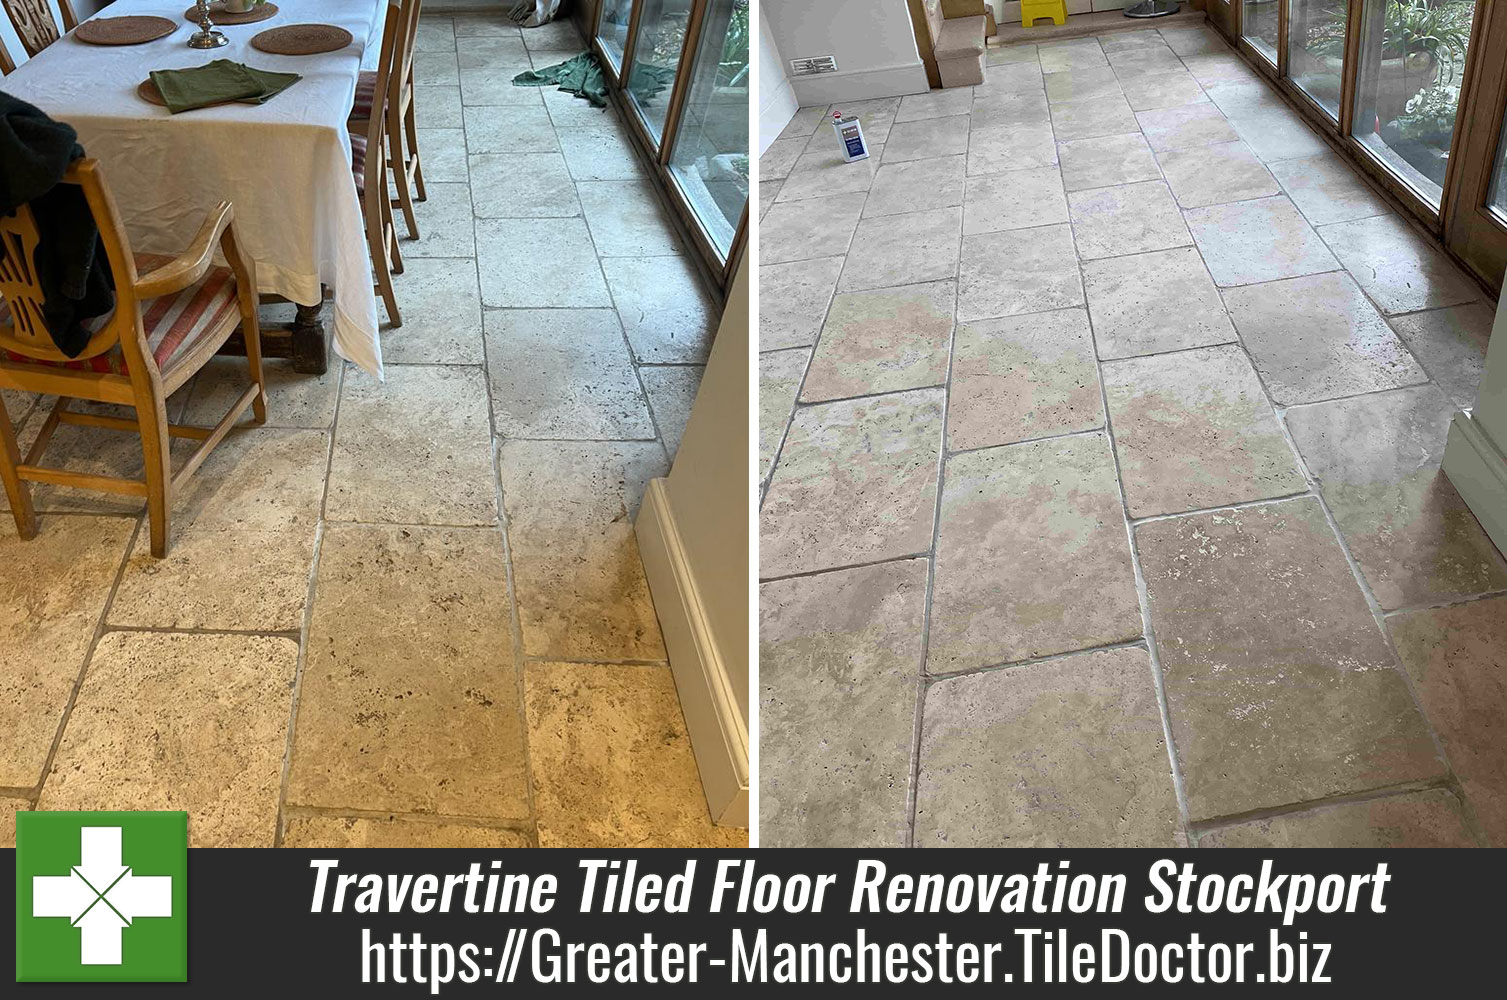 Deep Cleaning Travertine Flooring with Burnishing Pads in Stockport